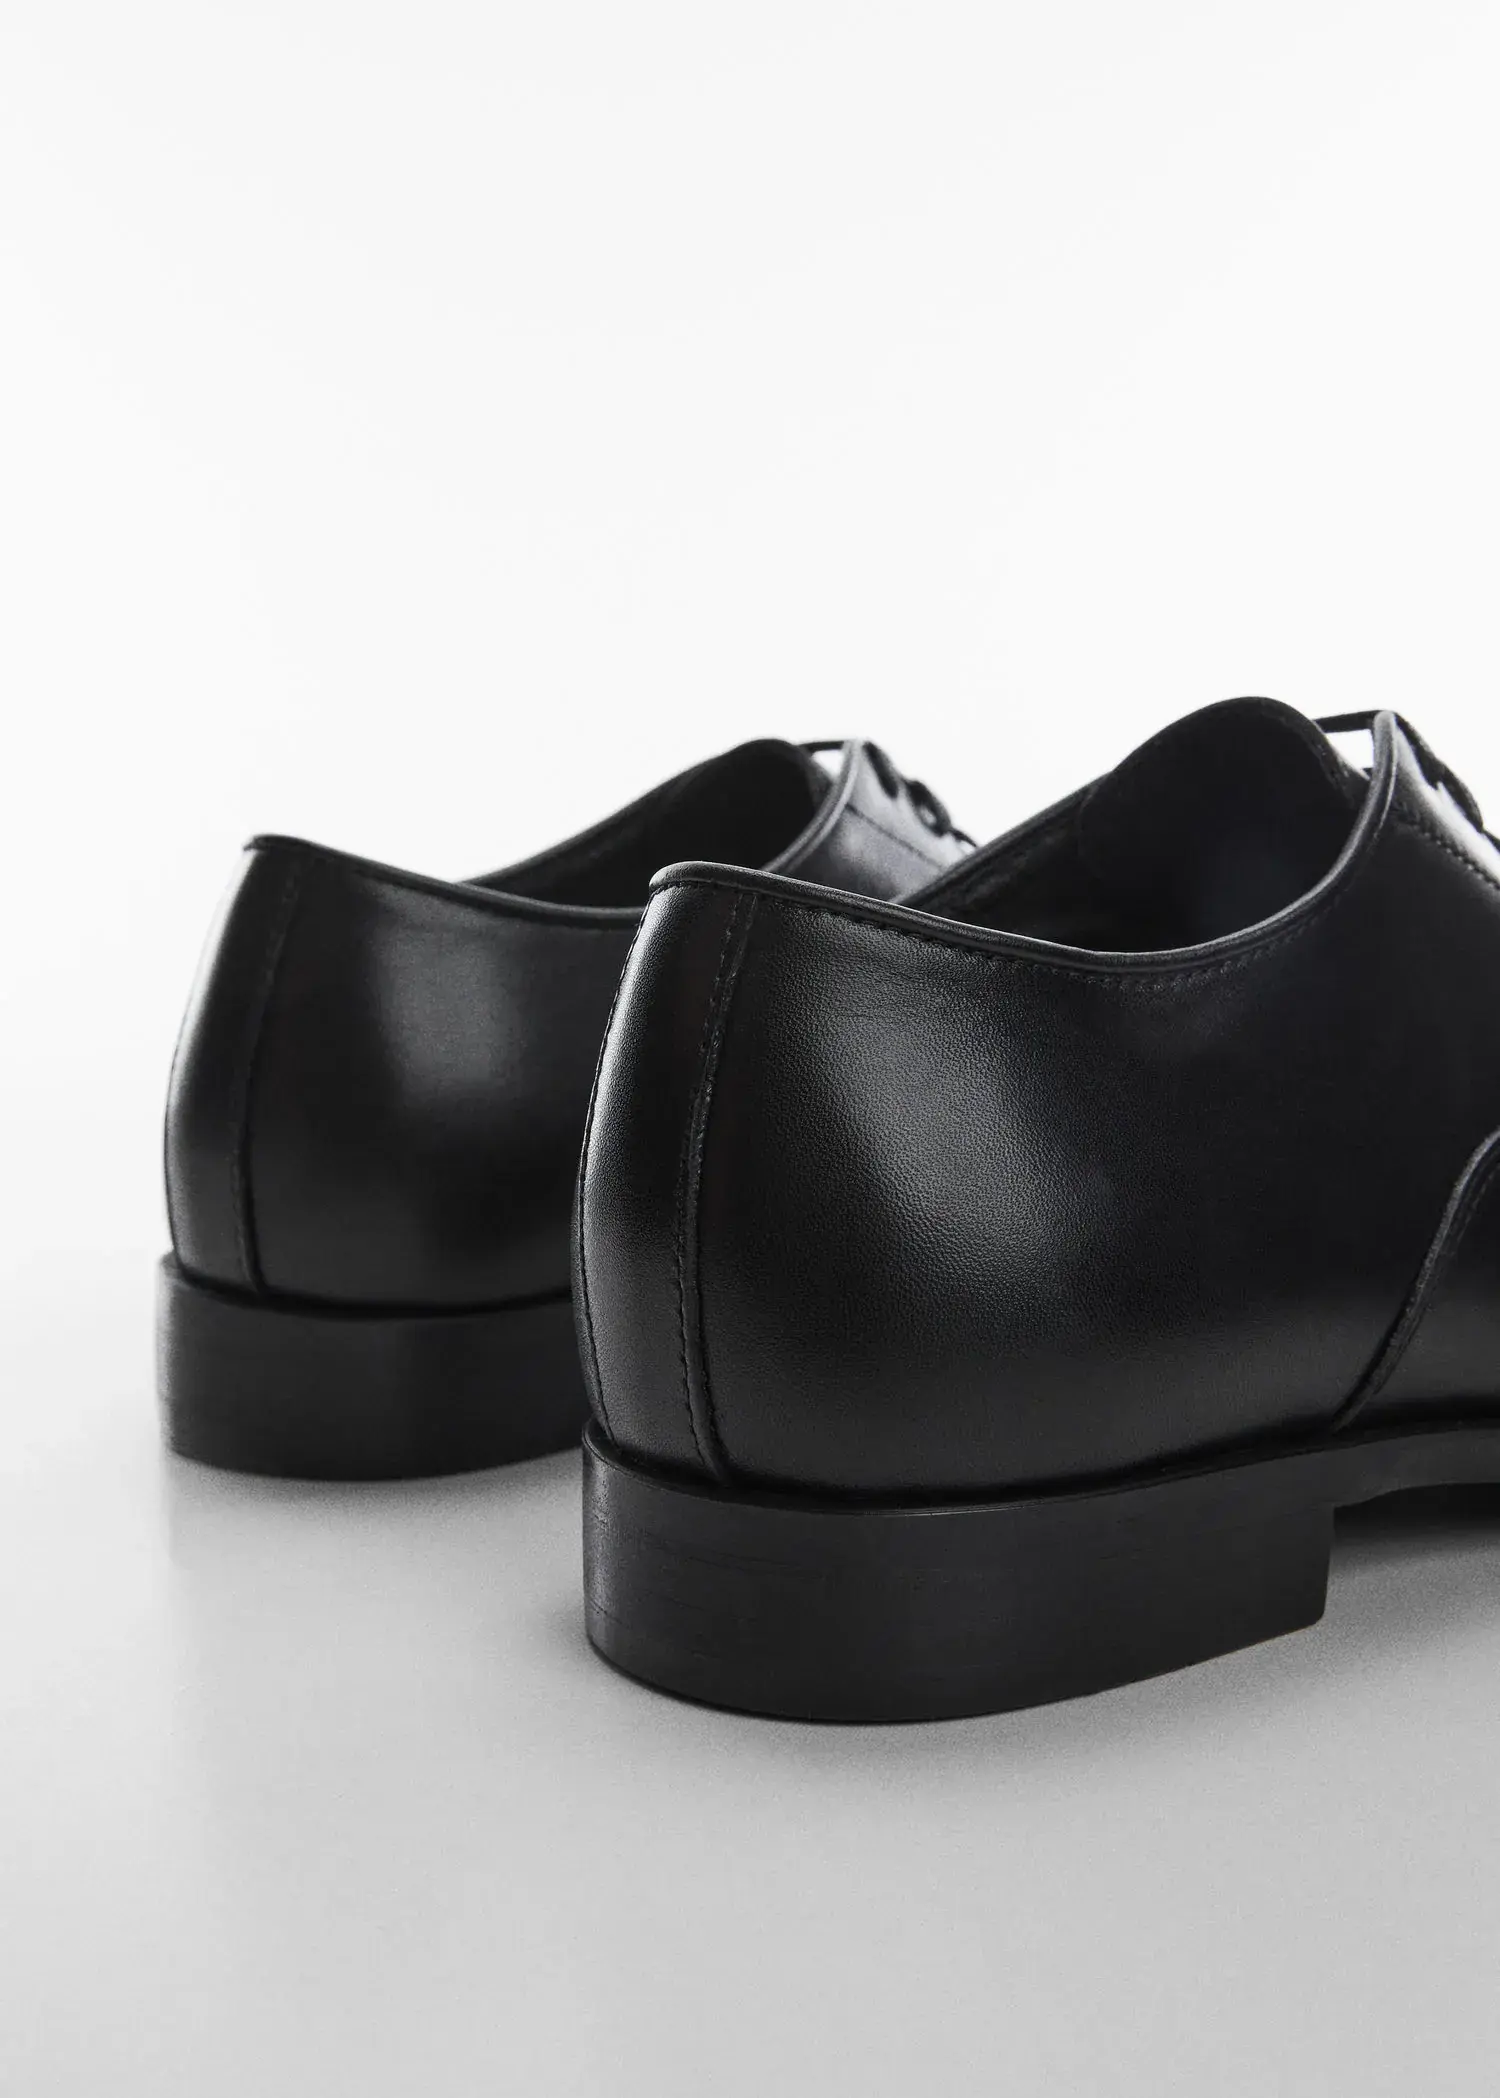 Mango Elongated leather suit shoes. a close up of a pair of black shoes. 